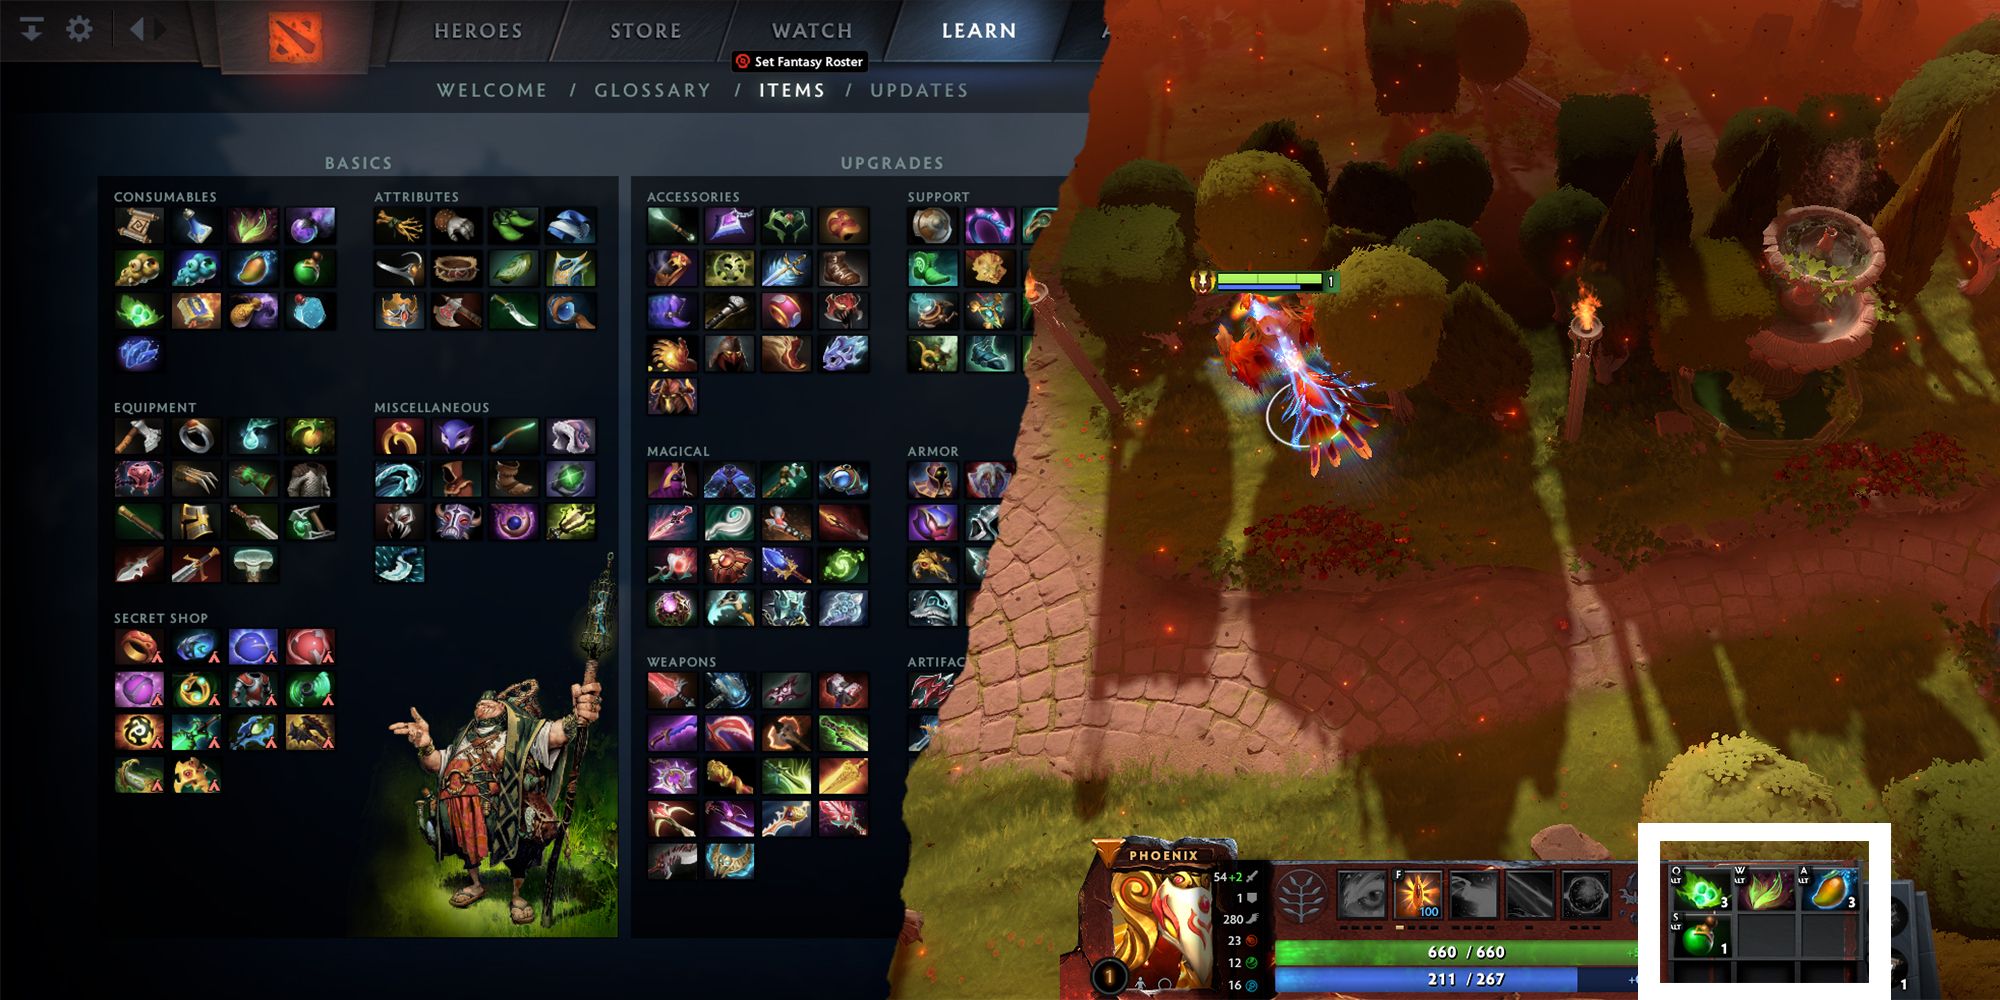 Dota 2: Item List and In-game Inventory Featuring Healing Items 